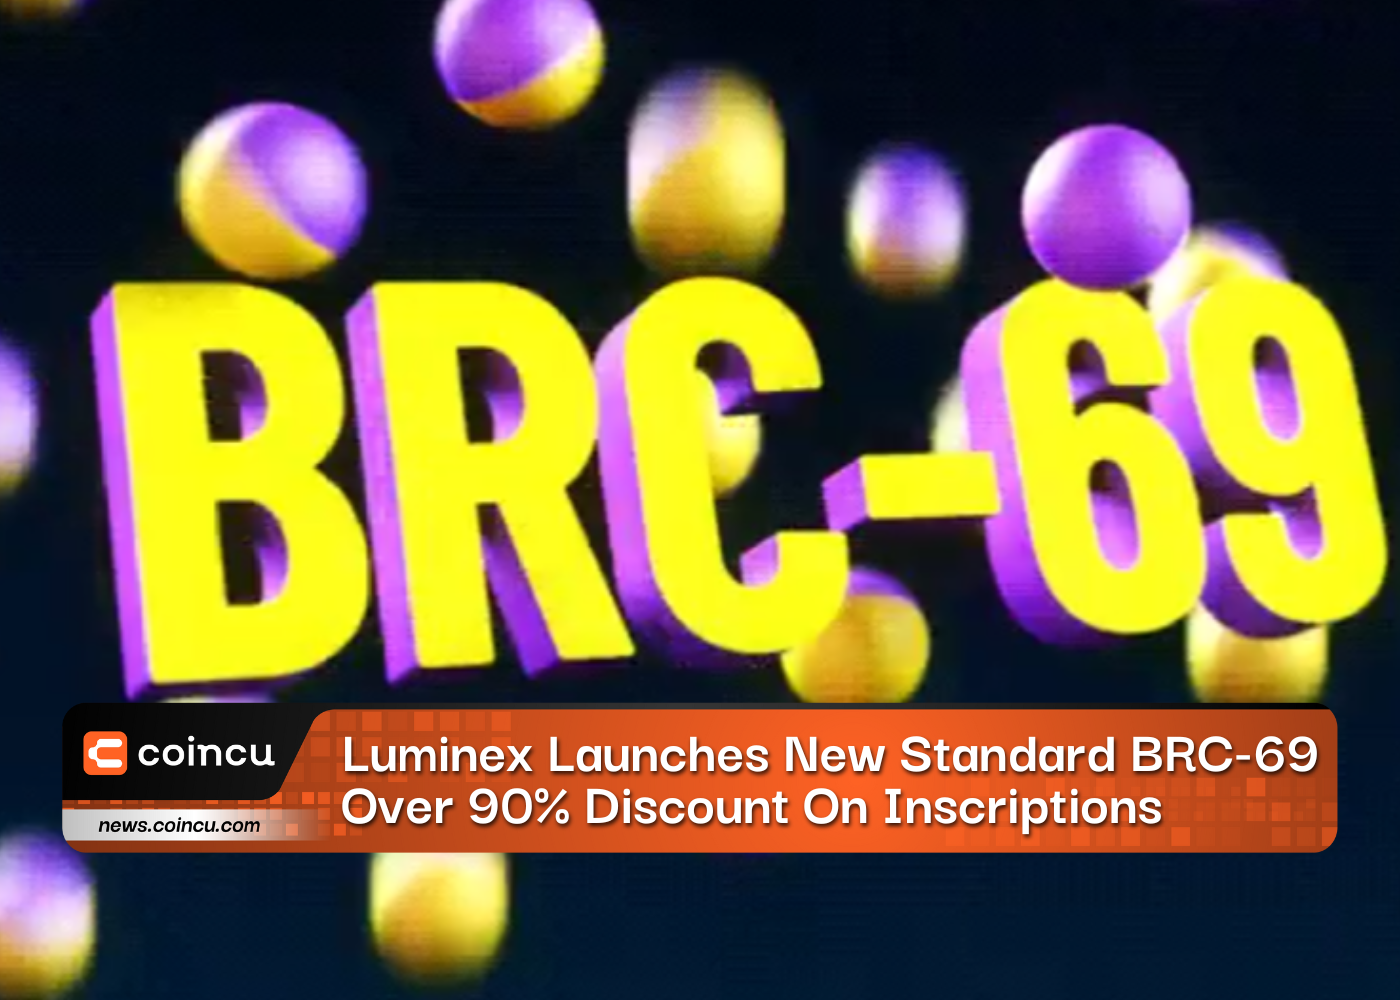 Luminex Launches New Standard BRC-69, Over 90% Discount On Inscriptions